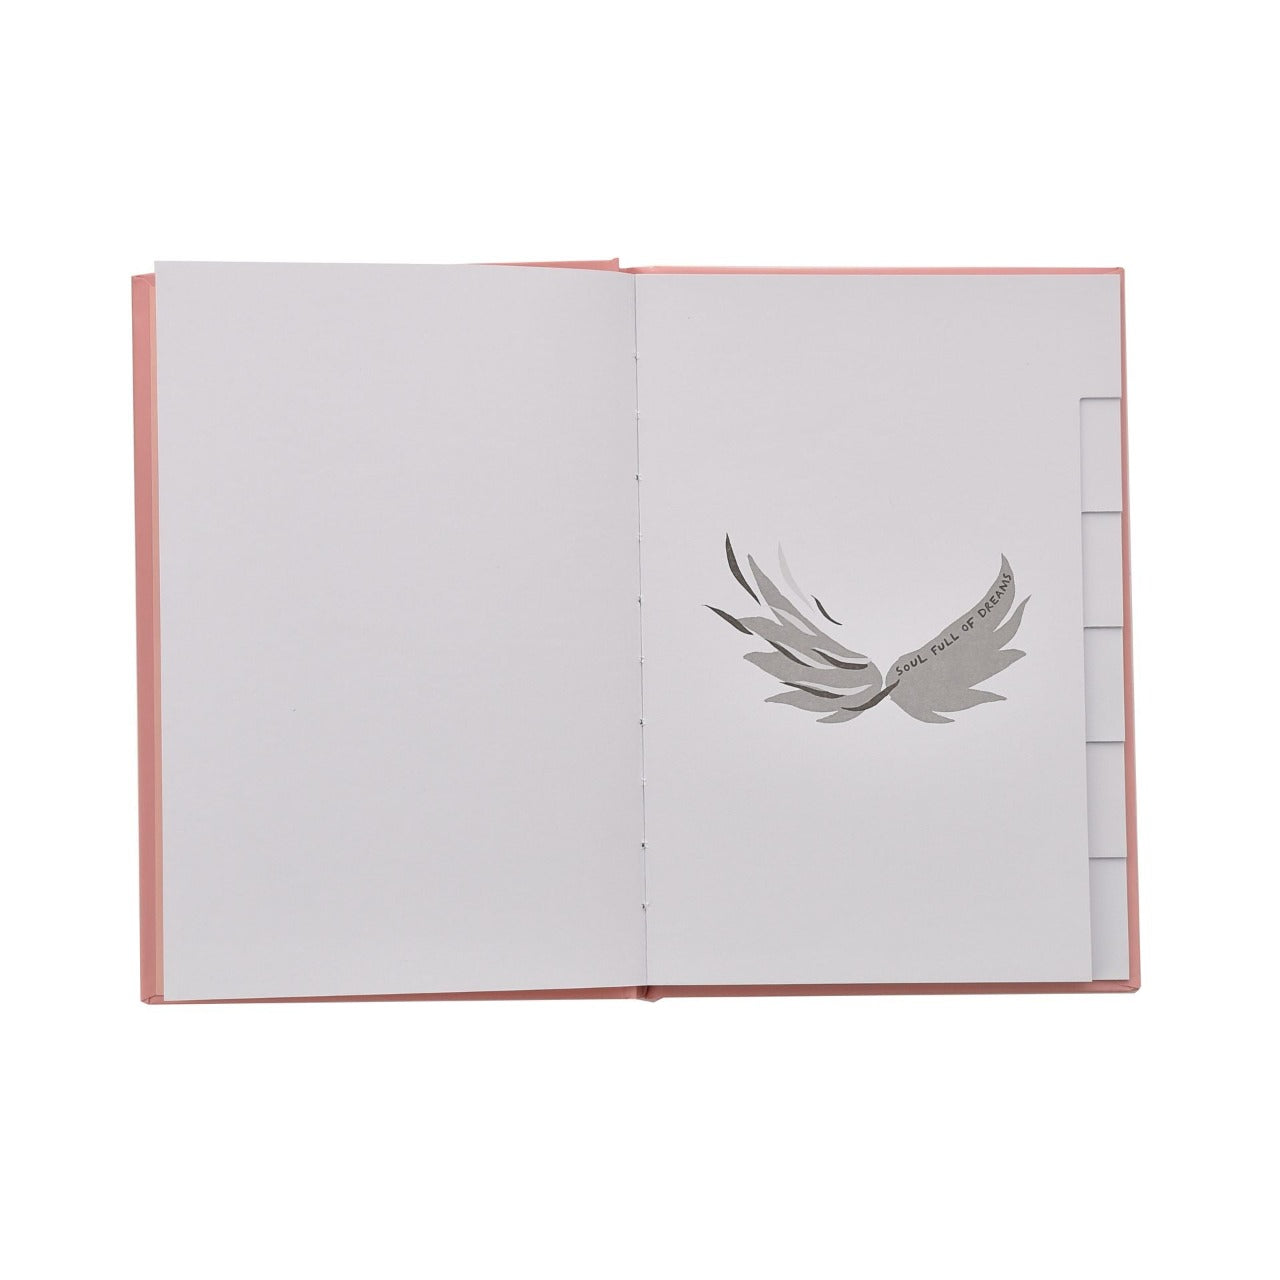 Righteous & Kind A5 Wings Journal  A stylish notebook that would make a beautiful gift for those who love to note down their thoughts or doodle. With a gold wing design, this would make a cute addition to any free spirit's stationary collection.